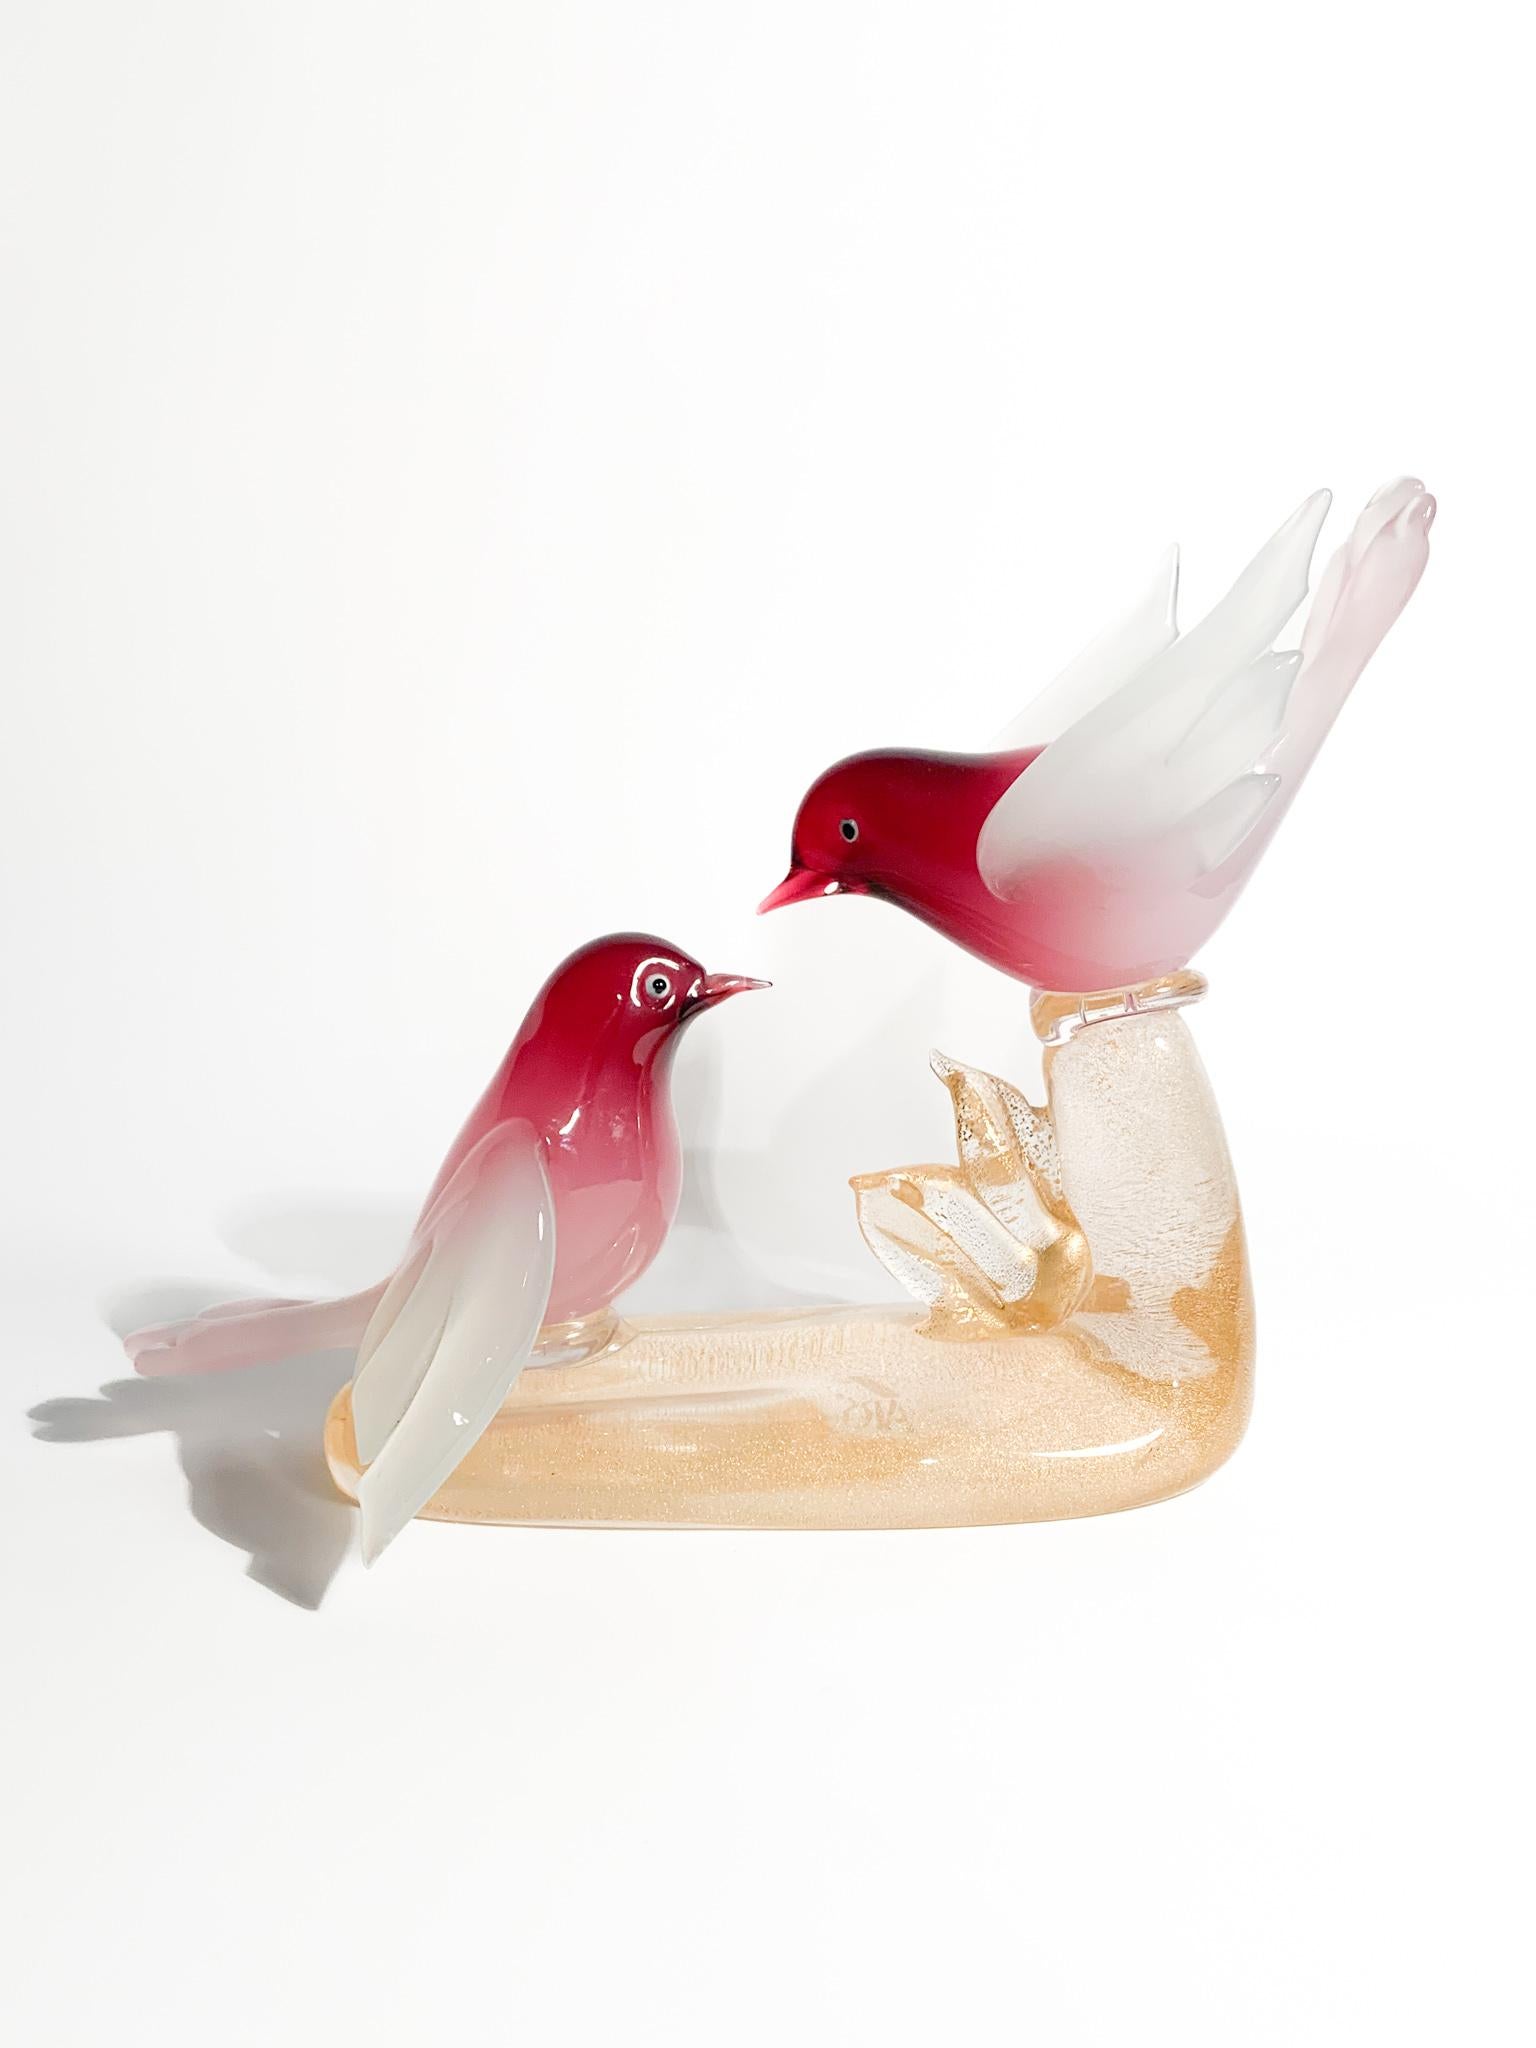 Sculpture of a Pair of Birds in Murano Glass by ARS Cenedese 1960s For Sale 2